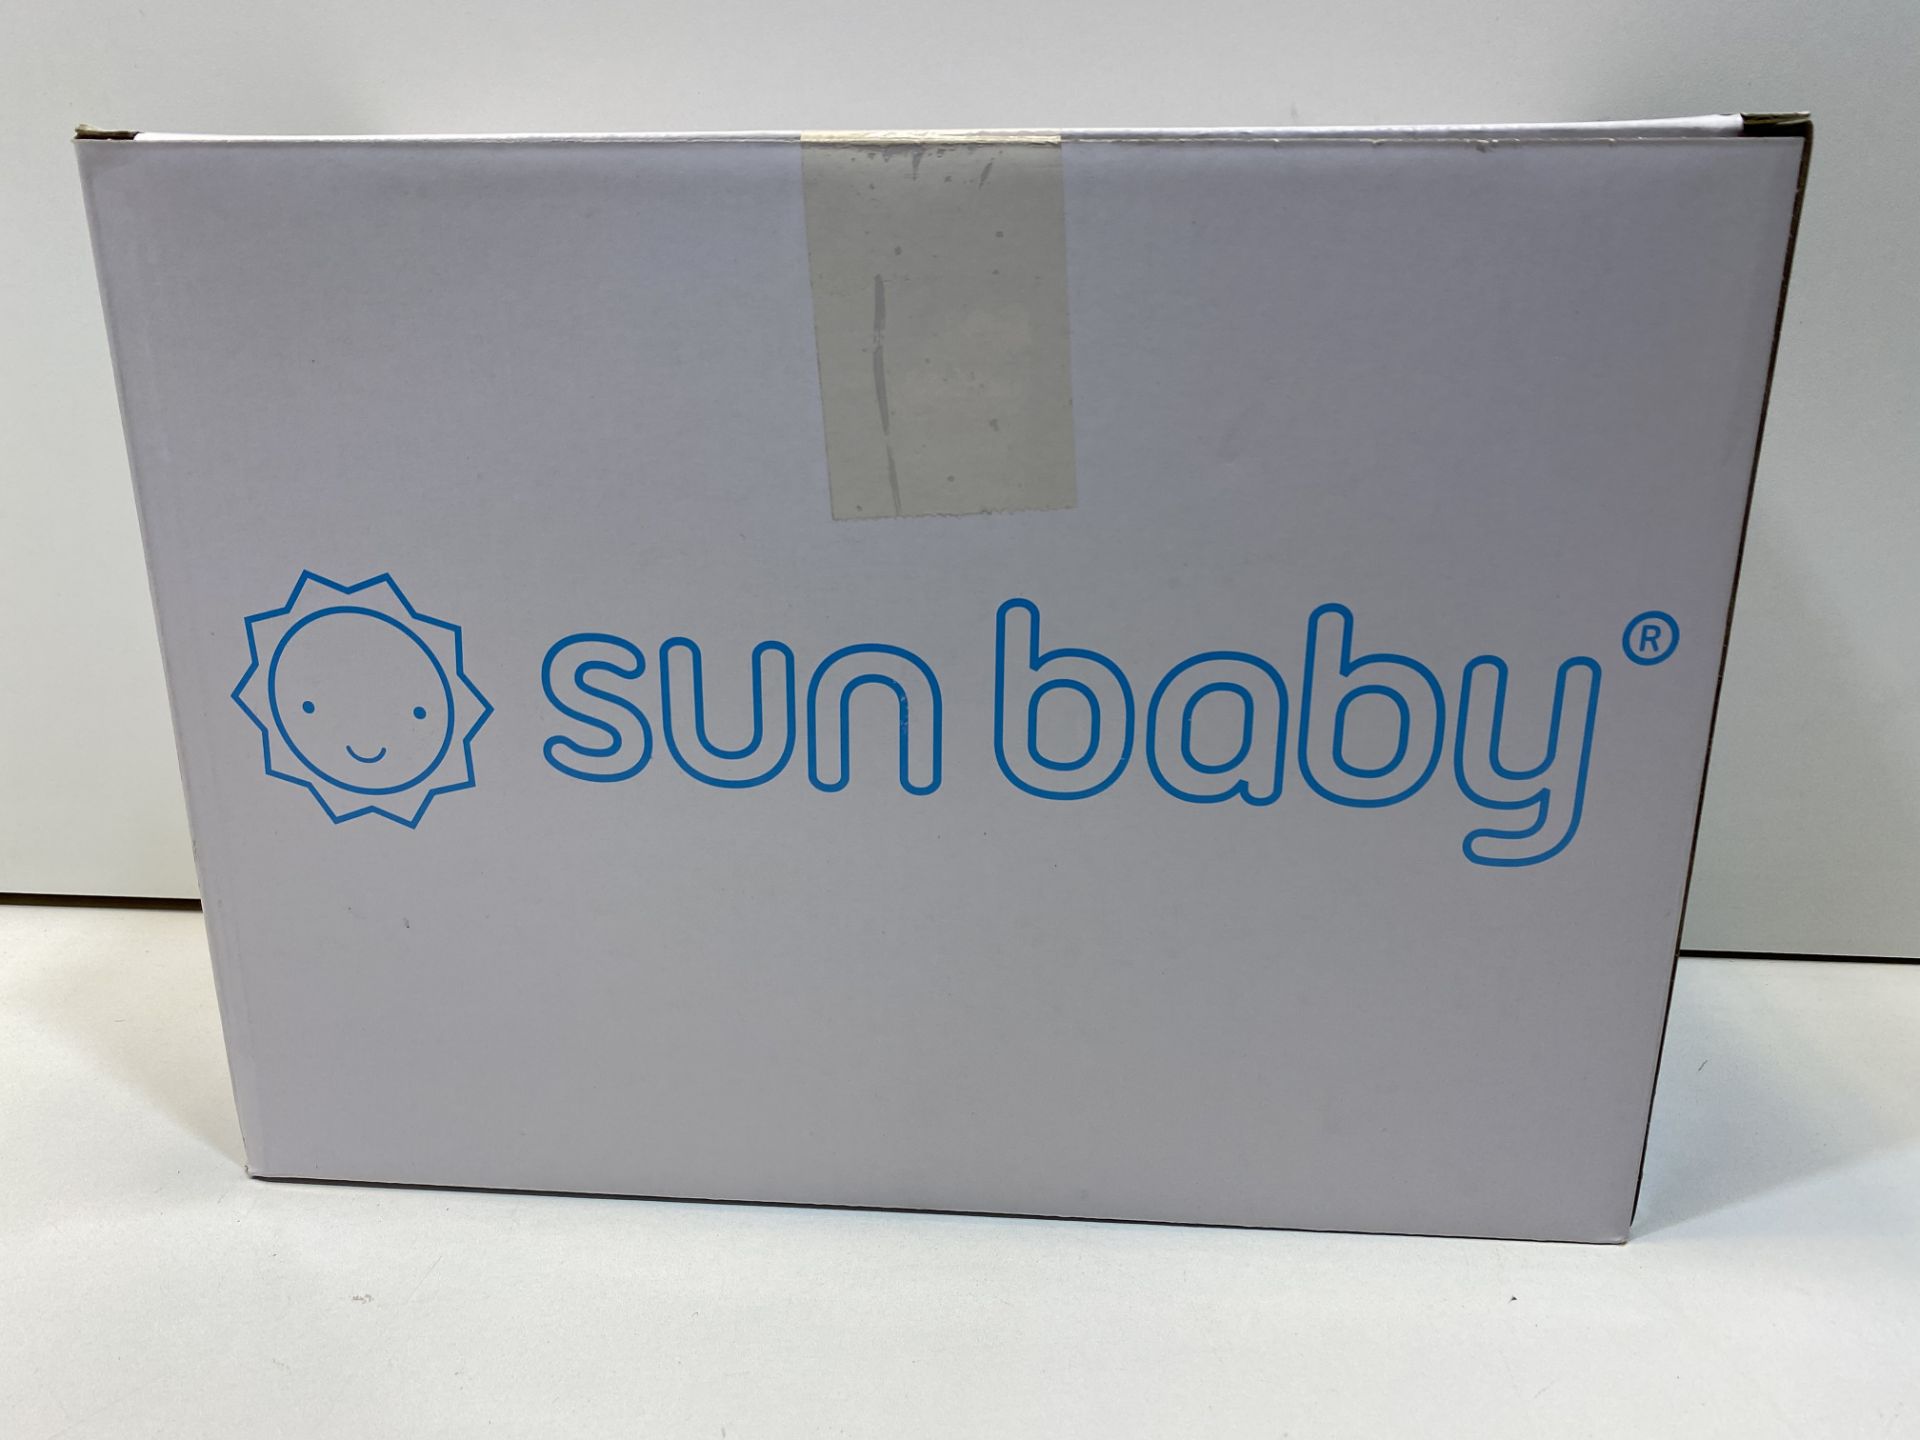 7 x Sun Baby Rubber Car bouncer - blue |5908446781895 - Image 2 of 3